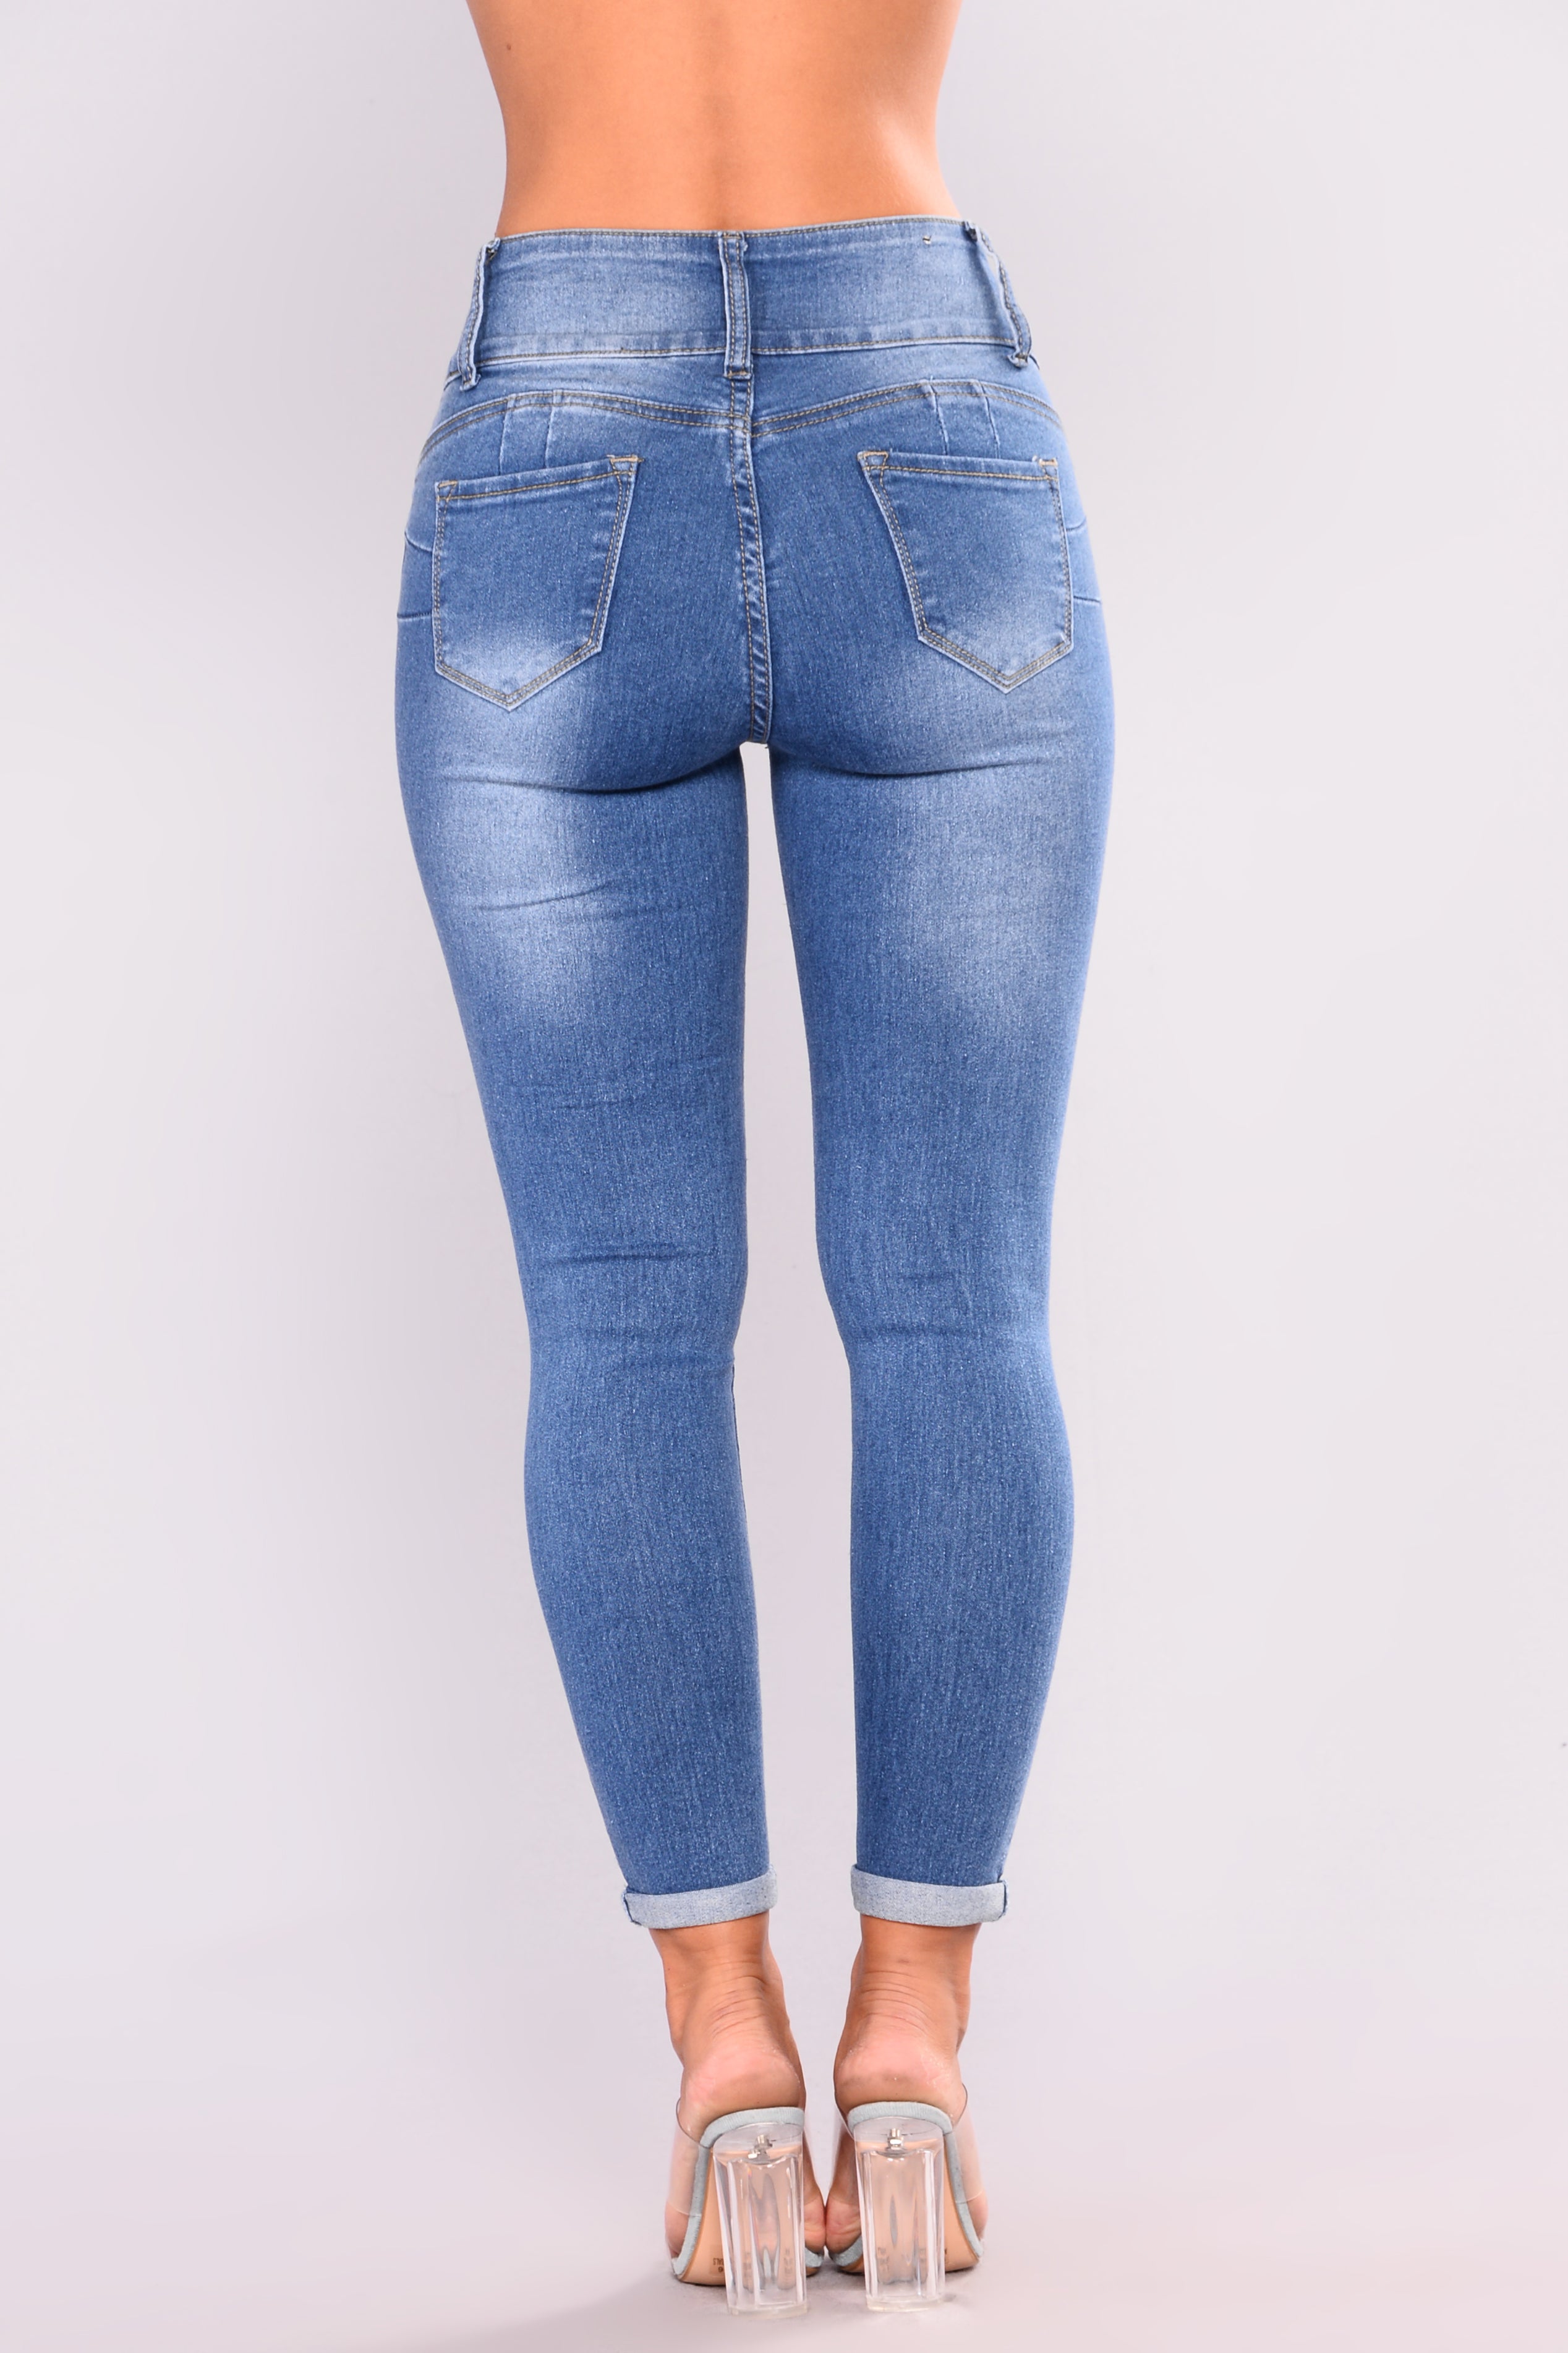 Cutie With A Booty Lifting Jeans Medium Blue Wash 